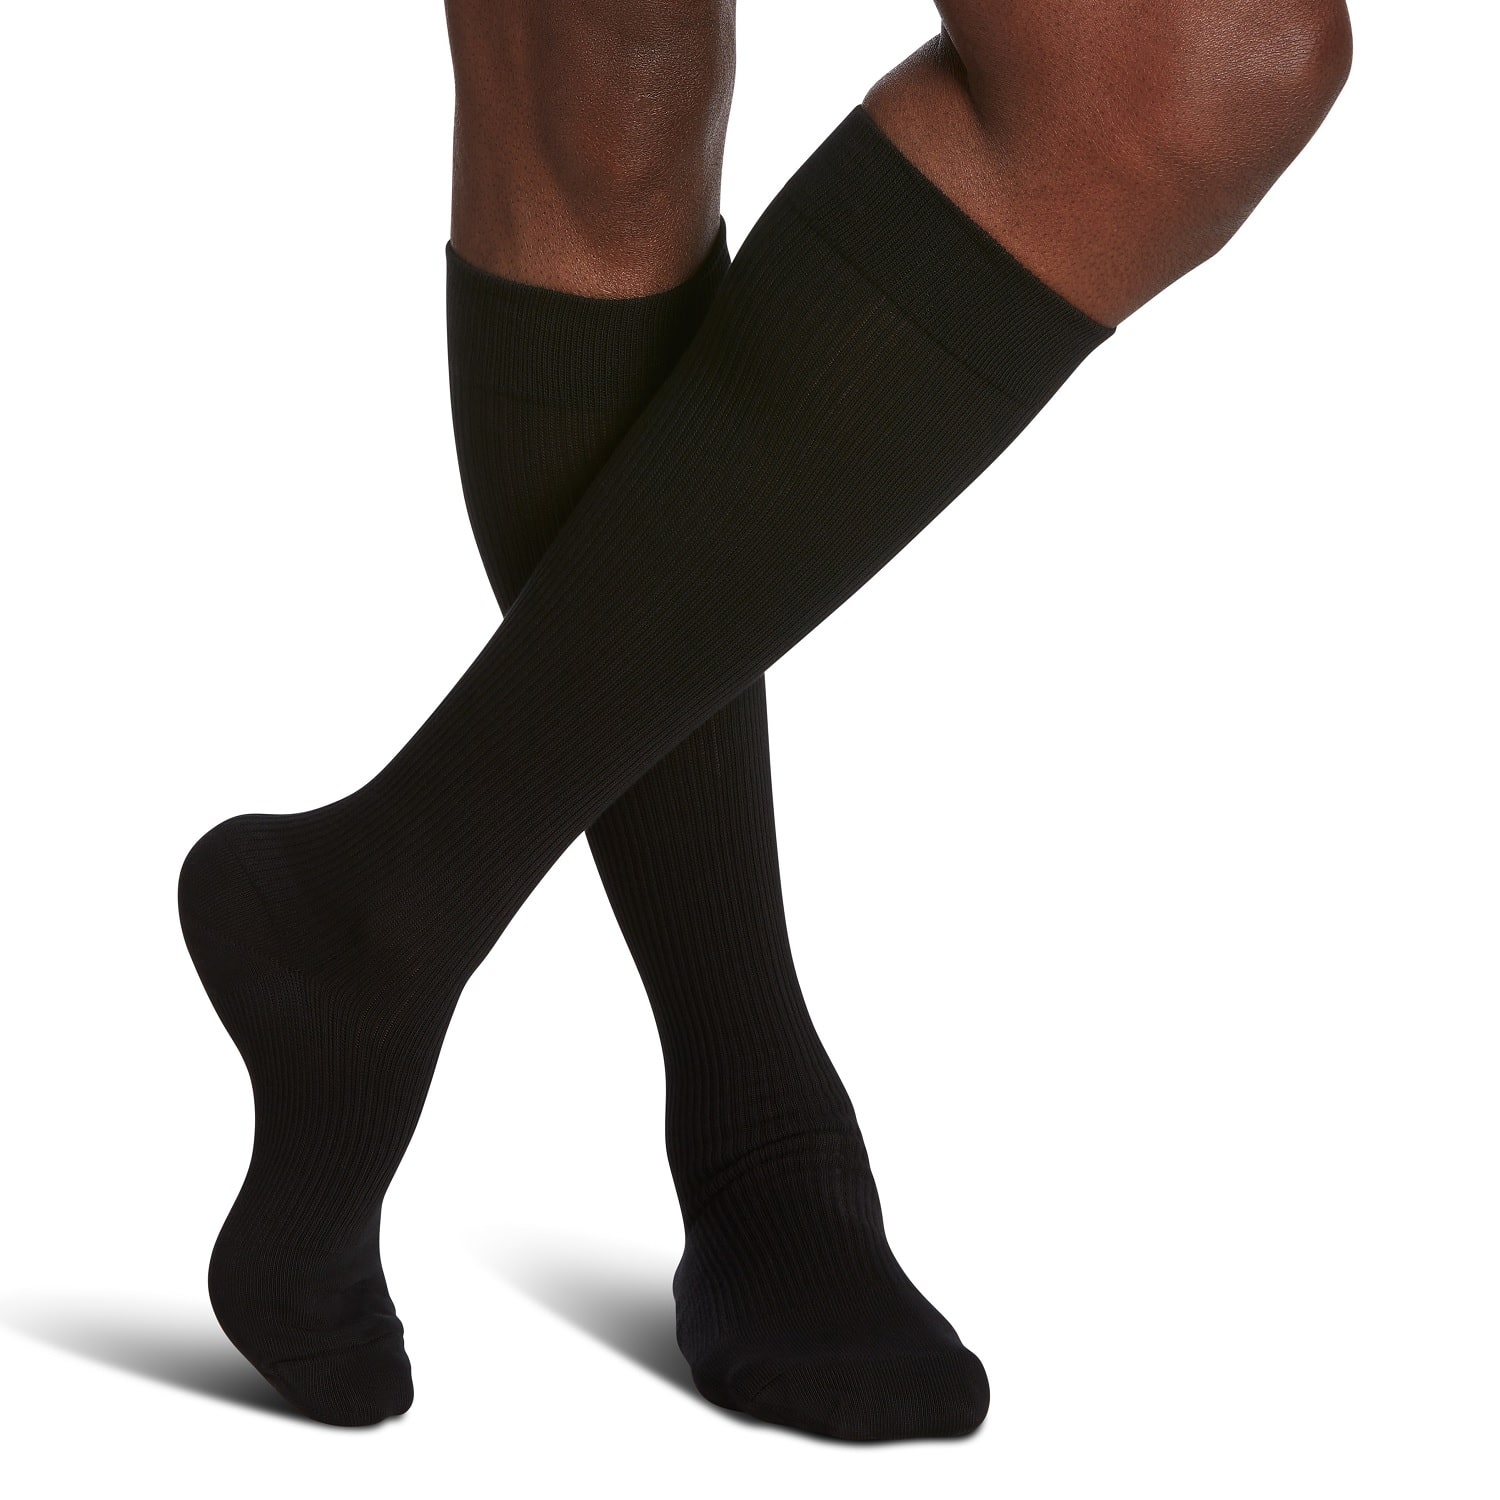  Graduated Compression Socks Circulation 20-30 mmHg Medical  Grade Athletic Socks for Edema, Diabetic, Varicose Veins Black S/M :  Clothing, Shoes & Jewelry